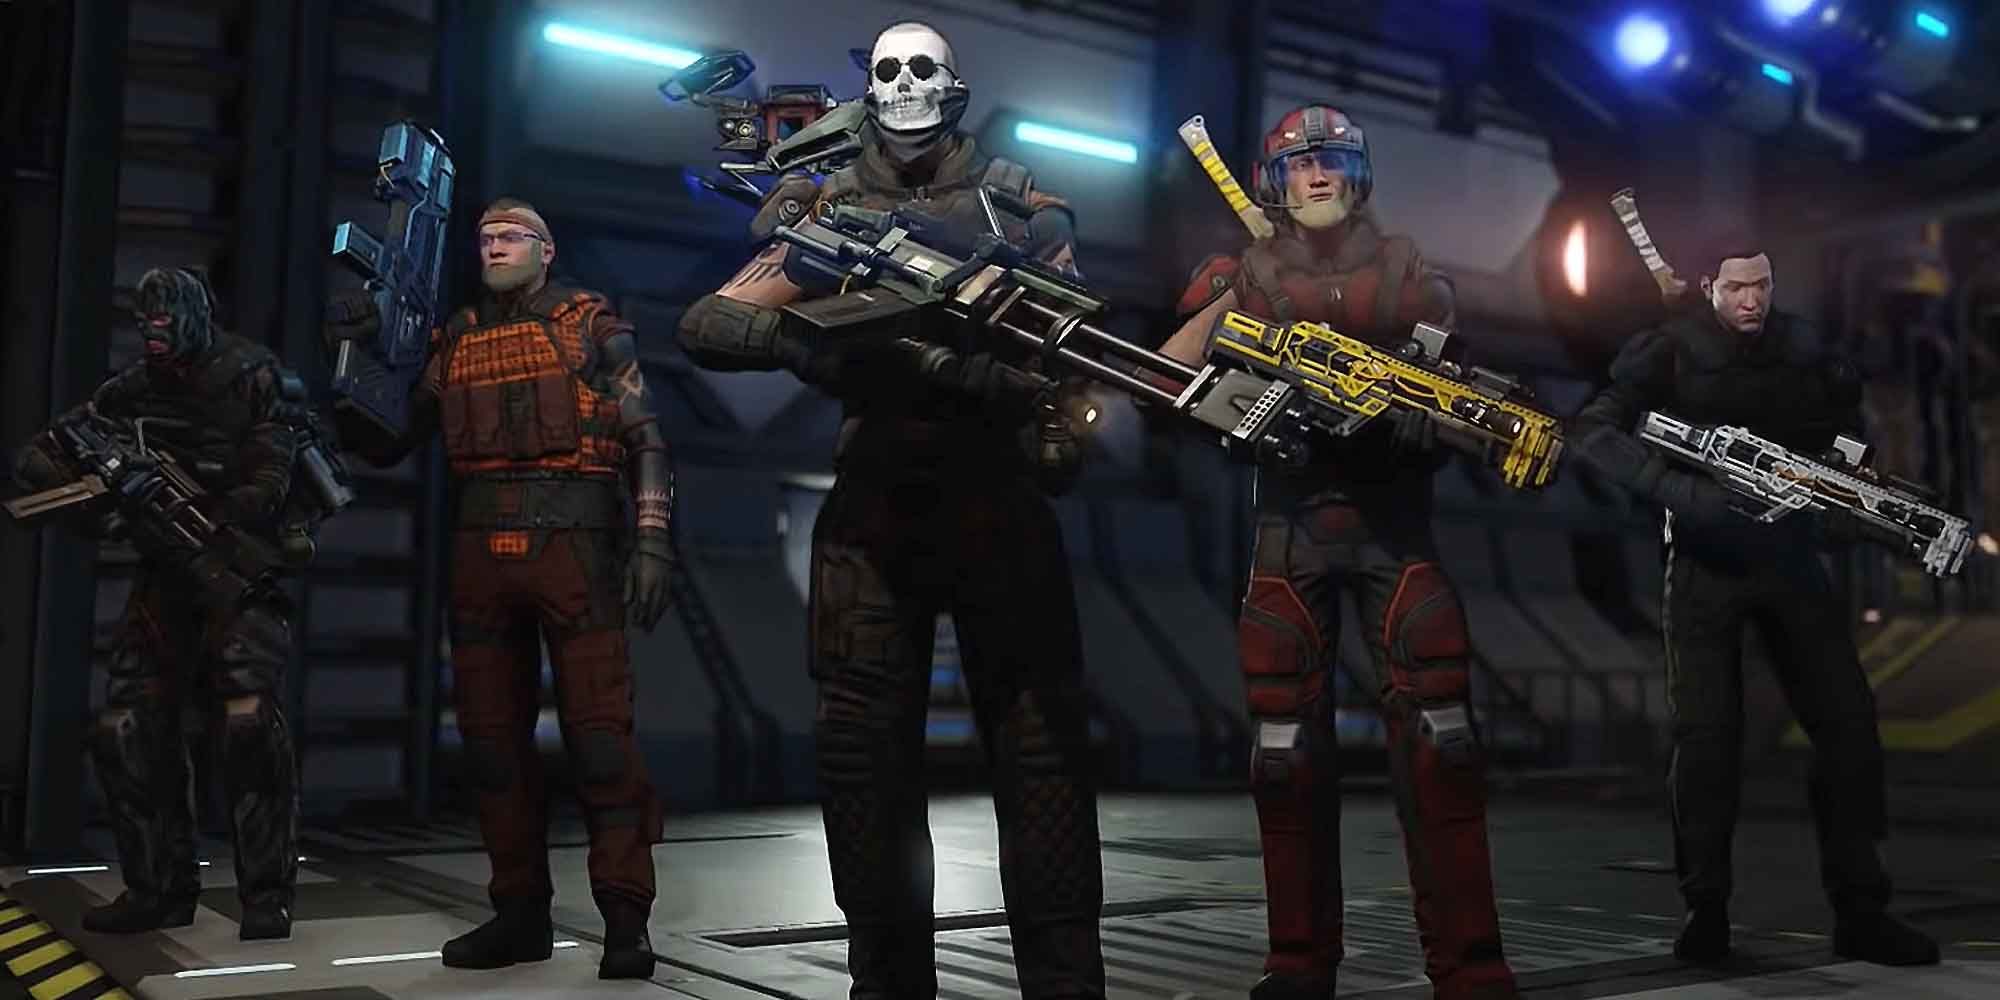 A squad about to deploy in Xcom 2